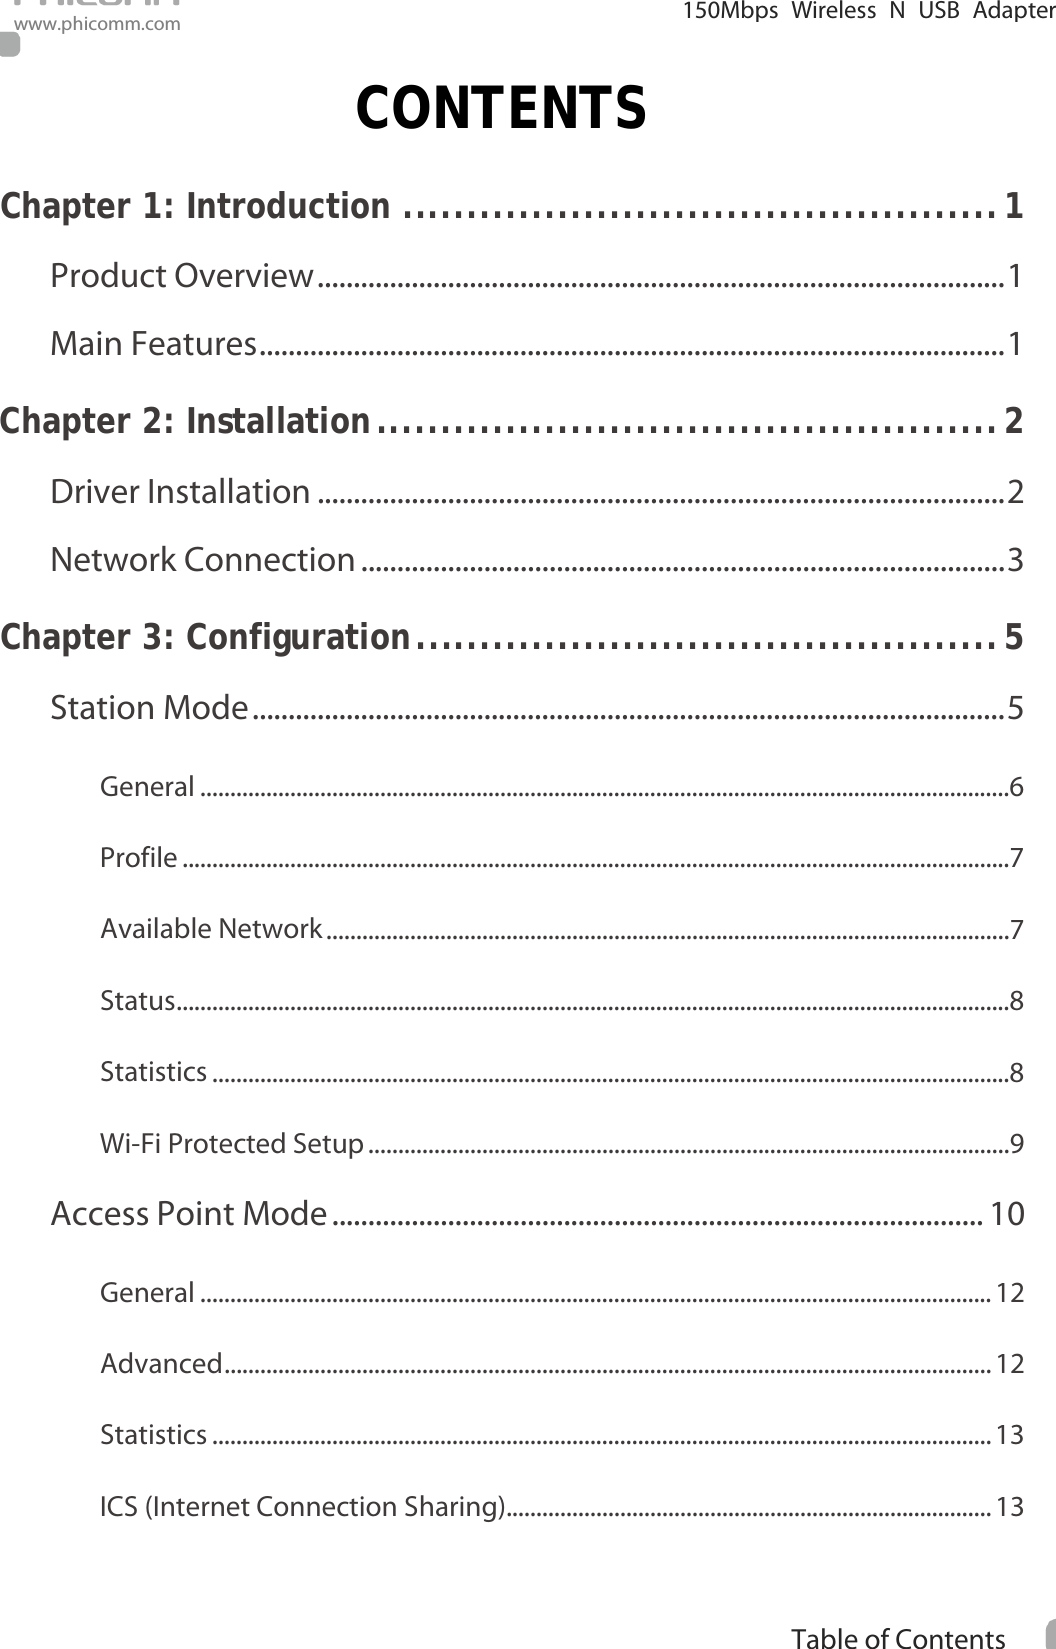                                                            i Table of Contents  150Mbps Wireless N USB Adapter www.phicomm.com CONTENTS Chapter 1: Introduction   .............................................. 1Product Overview   ............................................................................................... 1Main Features   ....................................................................................................... 1Chapter 2: Installation   ................................................ 2Driver Installation   ............................................................................................... 2Network Connection   ......................................................................................... 3Chapter 3: Configuration   ............................................. 5Station Mode   ........................................................................................................ 5General   .......................................................................................................................................6Profile   ..........................................................................................................................................7Available Network   ..................................................................................................................7Status   ...........................................................................................................................................8Statistics   .....................................................................................................................................8Wi-Fi Protected Setup   ...........................................................................................................9Access Point Mode   .......................................................................................... 10General   .................................................................................................................................... 12Advanced   ................................................................................................................................ 12Statistics   .................................................................................................................................. 13ICS (Internet Connection Sharing)  ................................................................................. 13